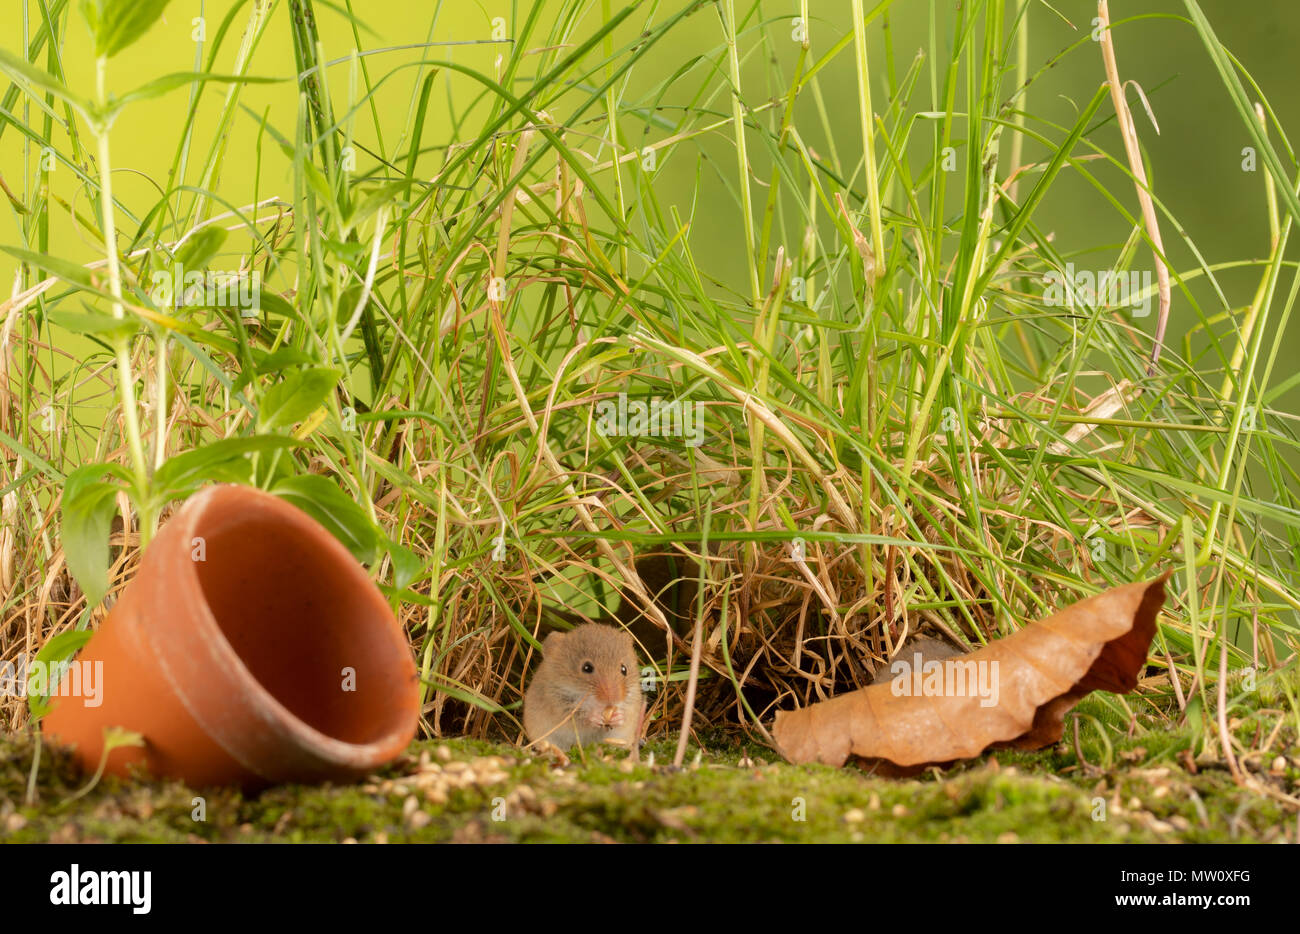 wild harvest mouse foraging for seeds Stock Photo